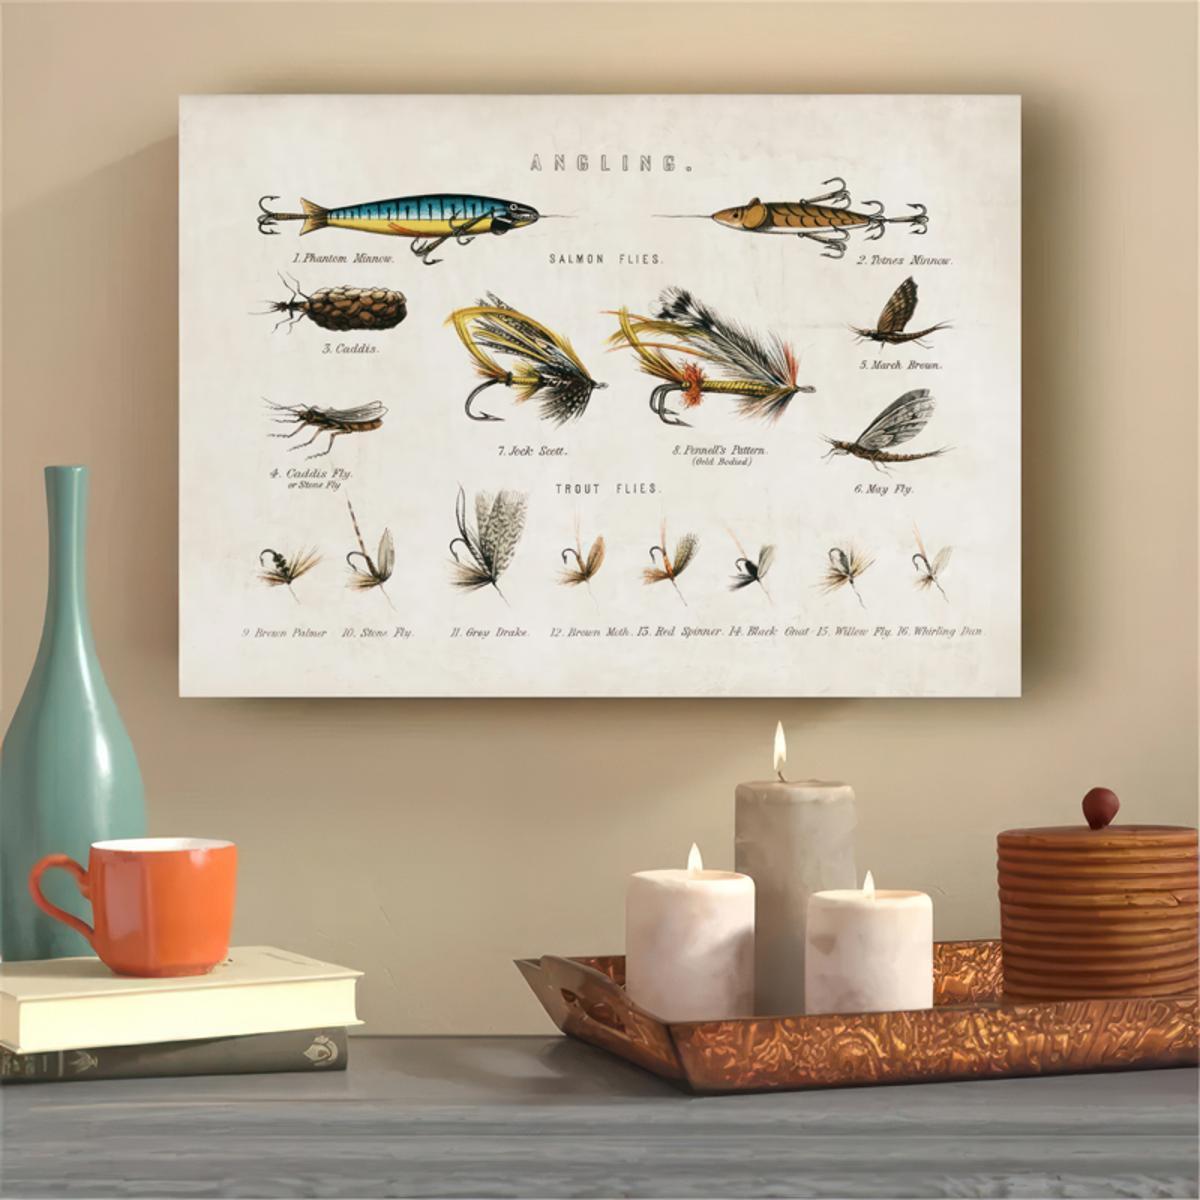 Fly Fishing Knowledge Poster, Fly Fishing Knots Poster, Fishing Home Decor,  Fishing Vintage Poster, Canvas Wall Art Print Poster For Home School